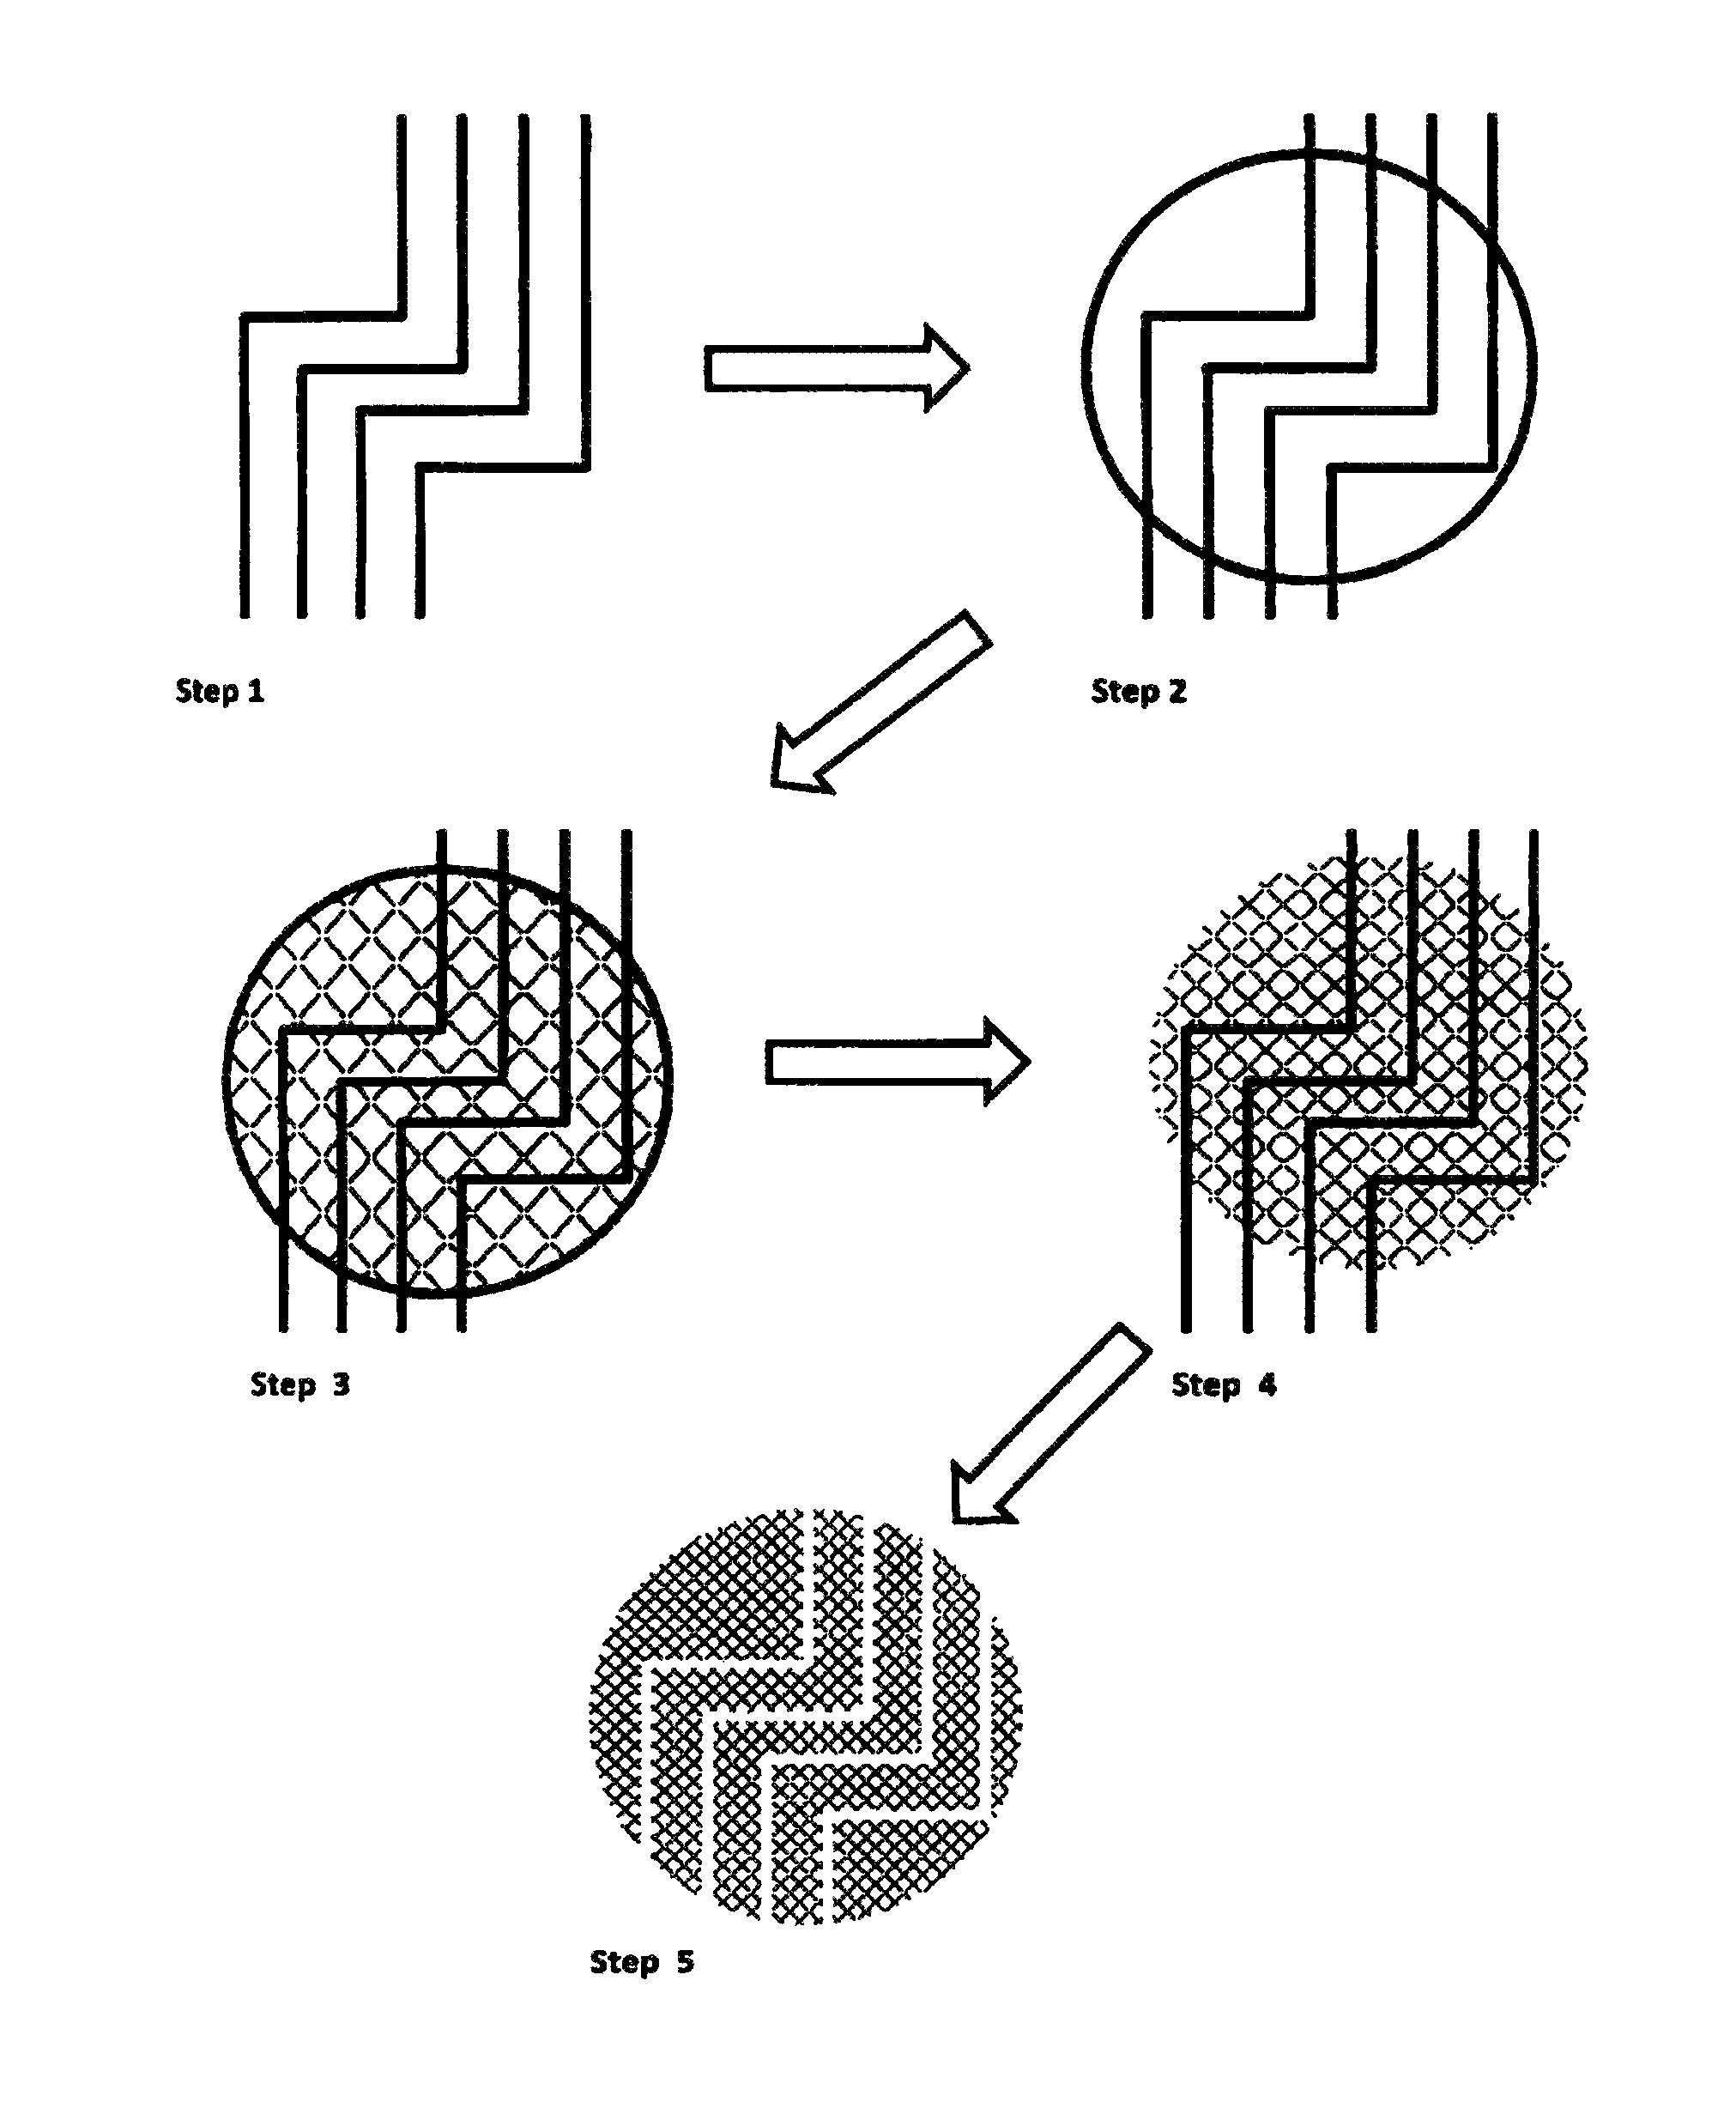 Method for producing bulk ceramic components from agglomerations of partially cured gelatinous polymer ceramic precursor resin droplets